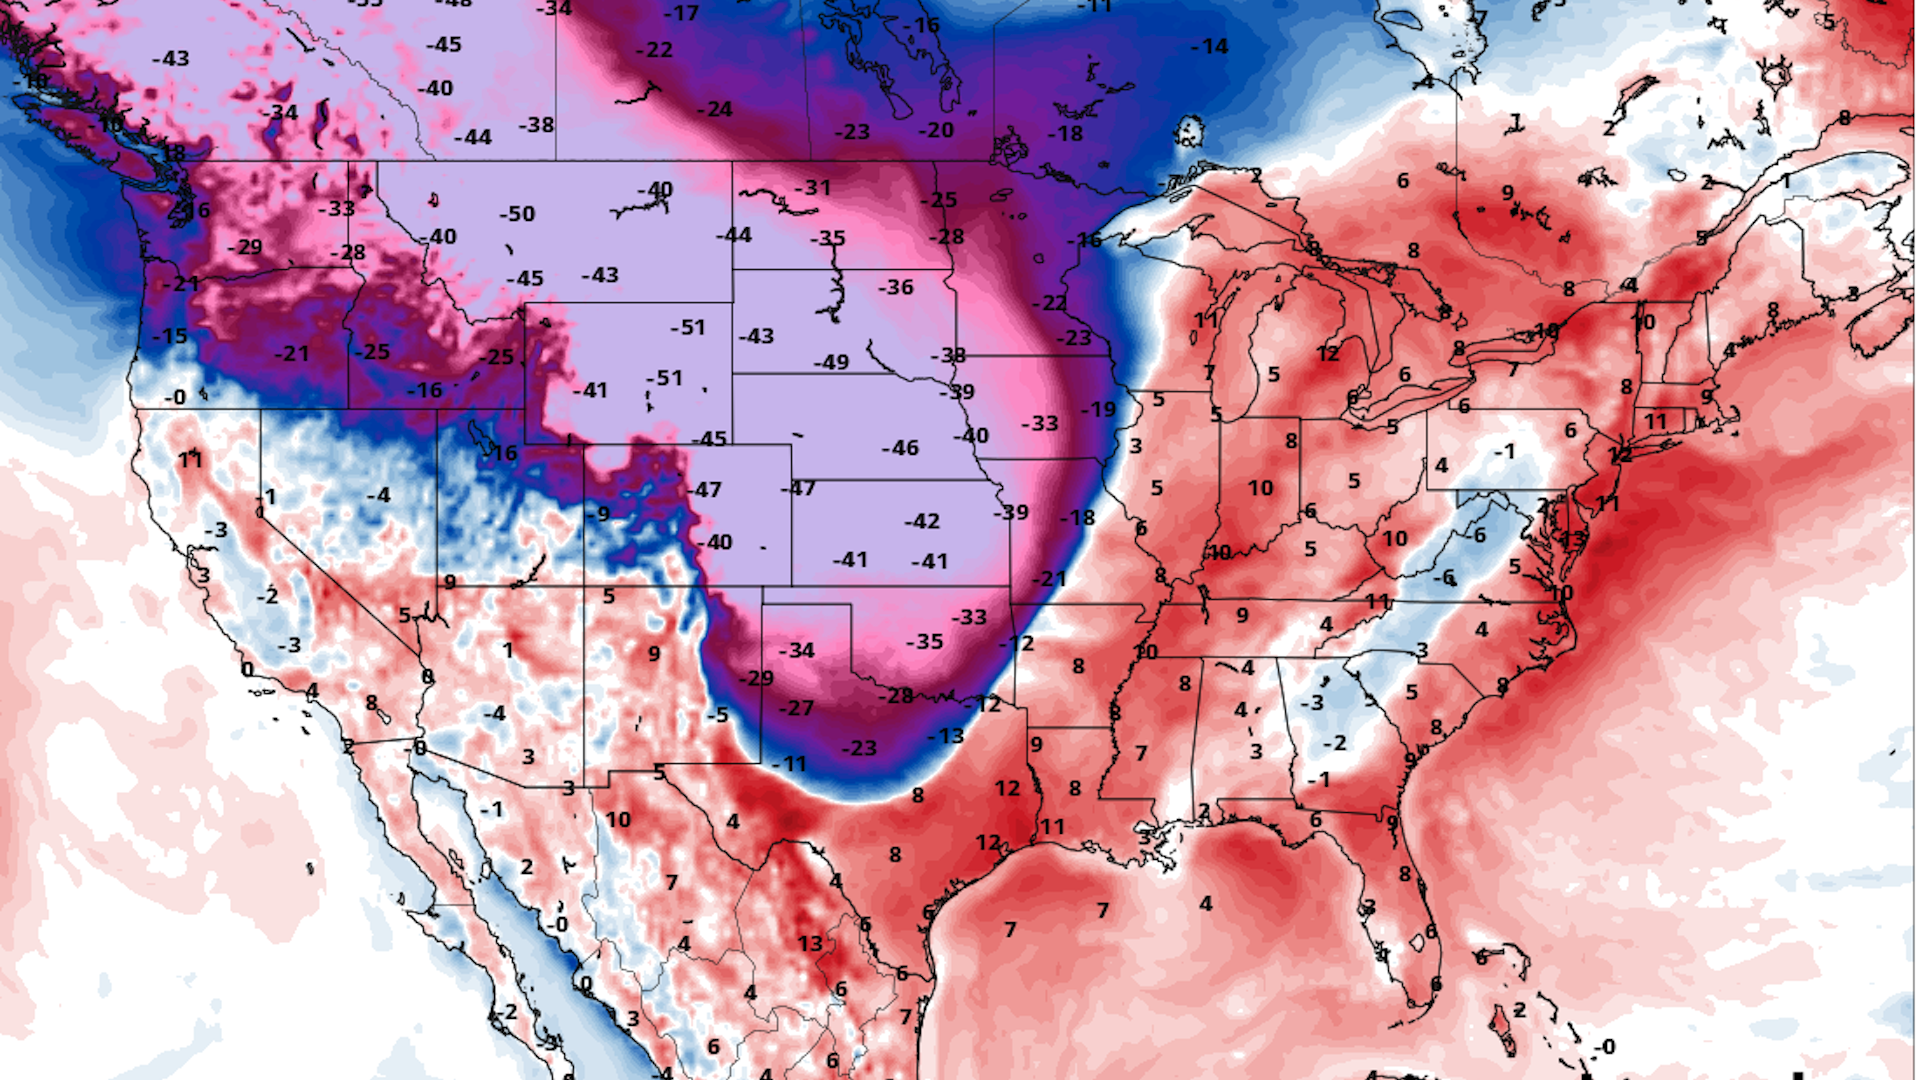 Computer model projection showing temperature departures from average by late this week.